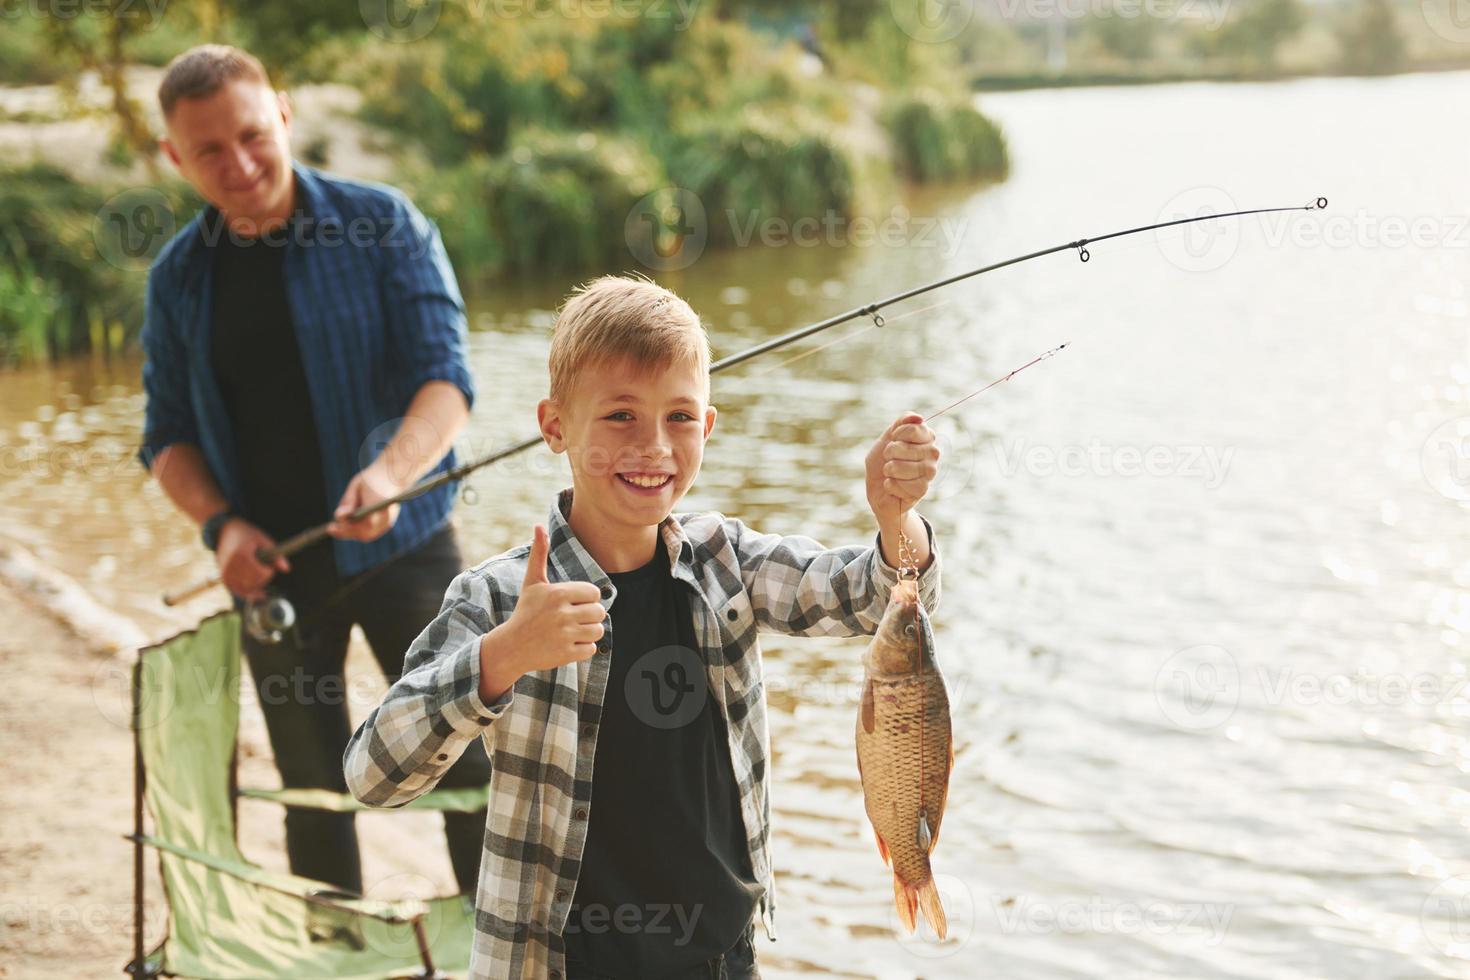 Showing the catch. Father and son on fishing together outdoors at summertime photo